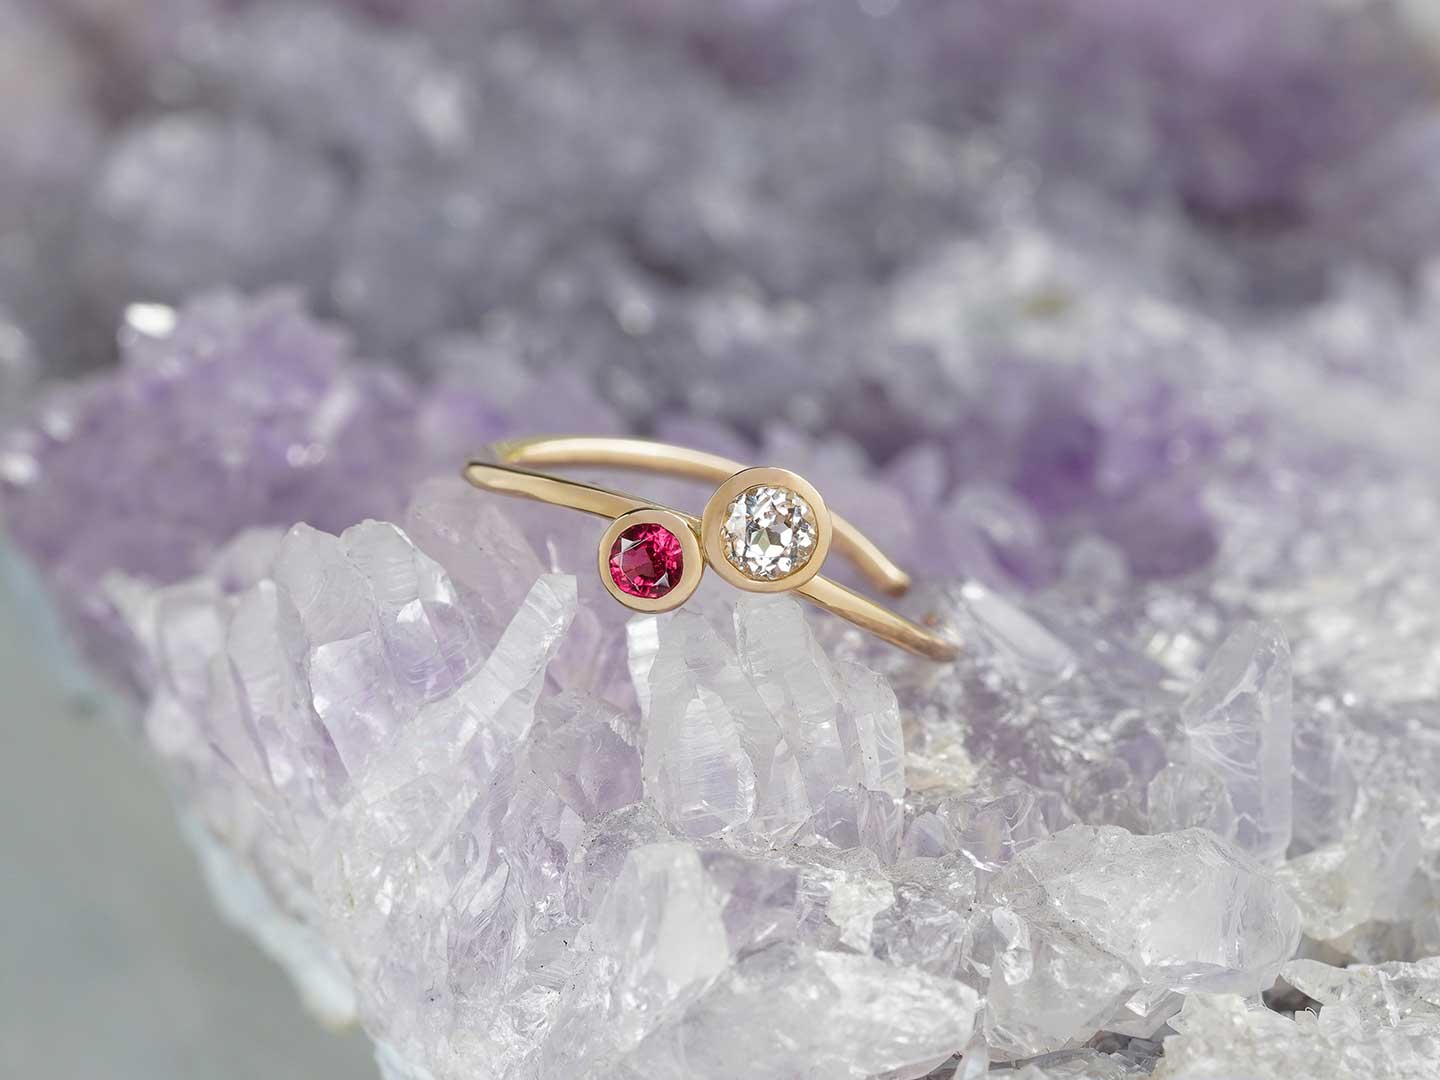 Danburite × Red spinel ear cuff ring /ダンビュライト、レッド